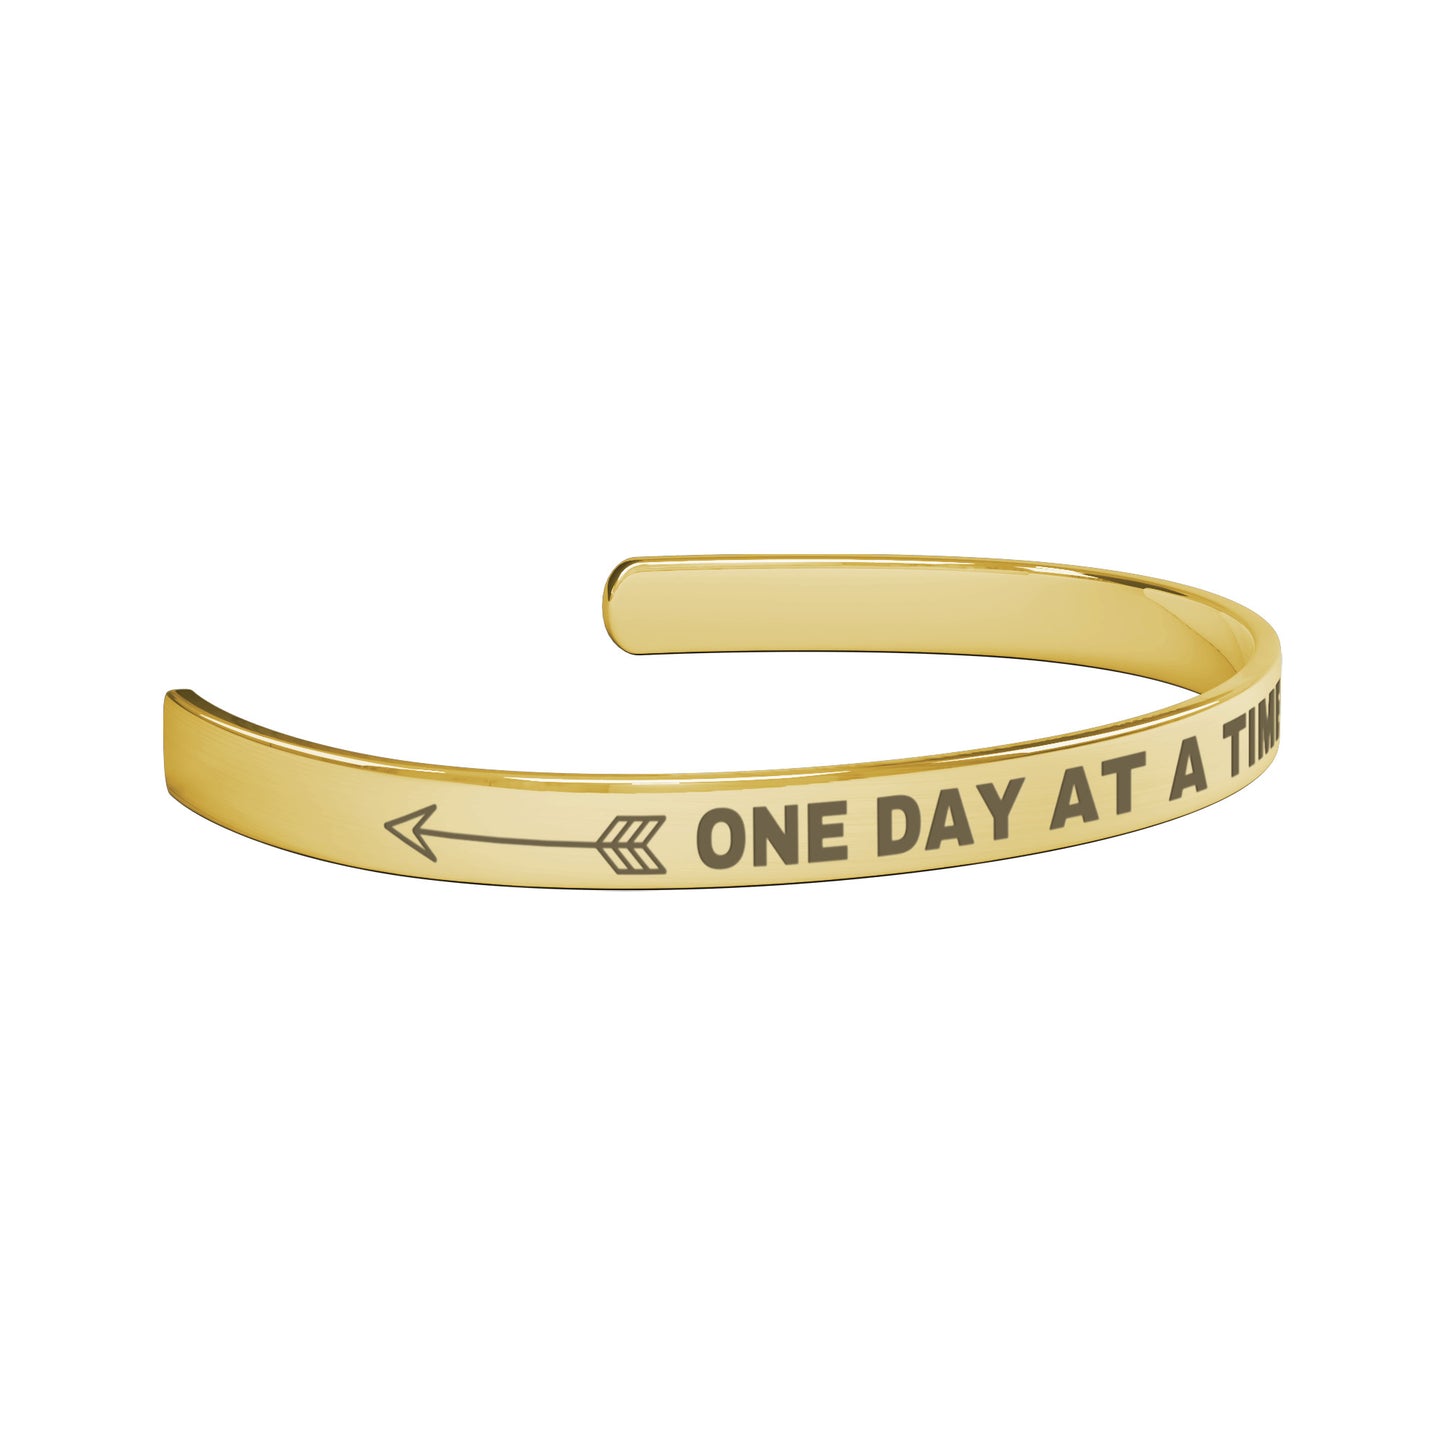 ONE DAY AT A TIME | CUFF BRACELET